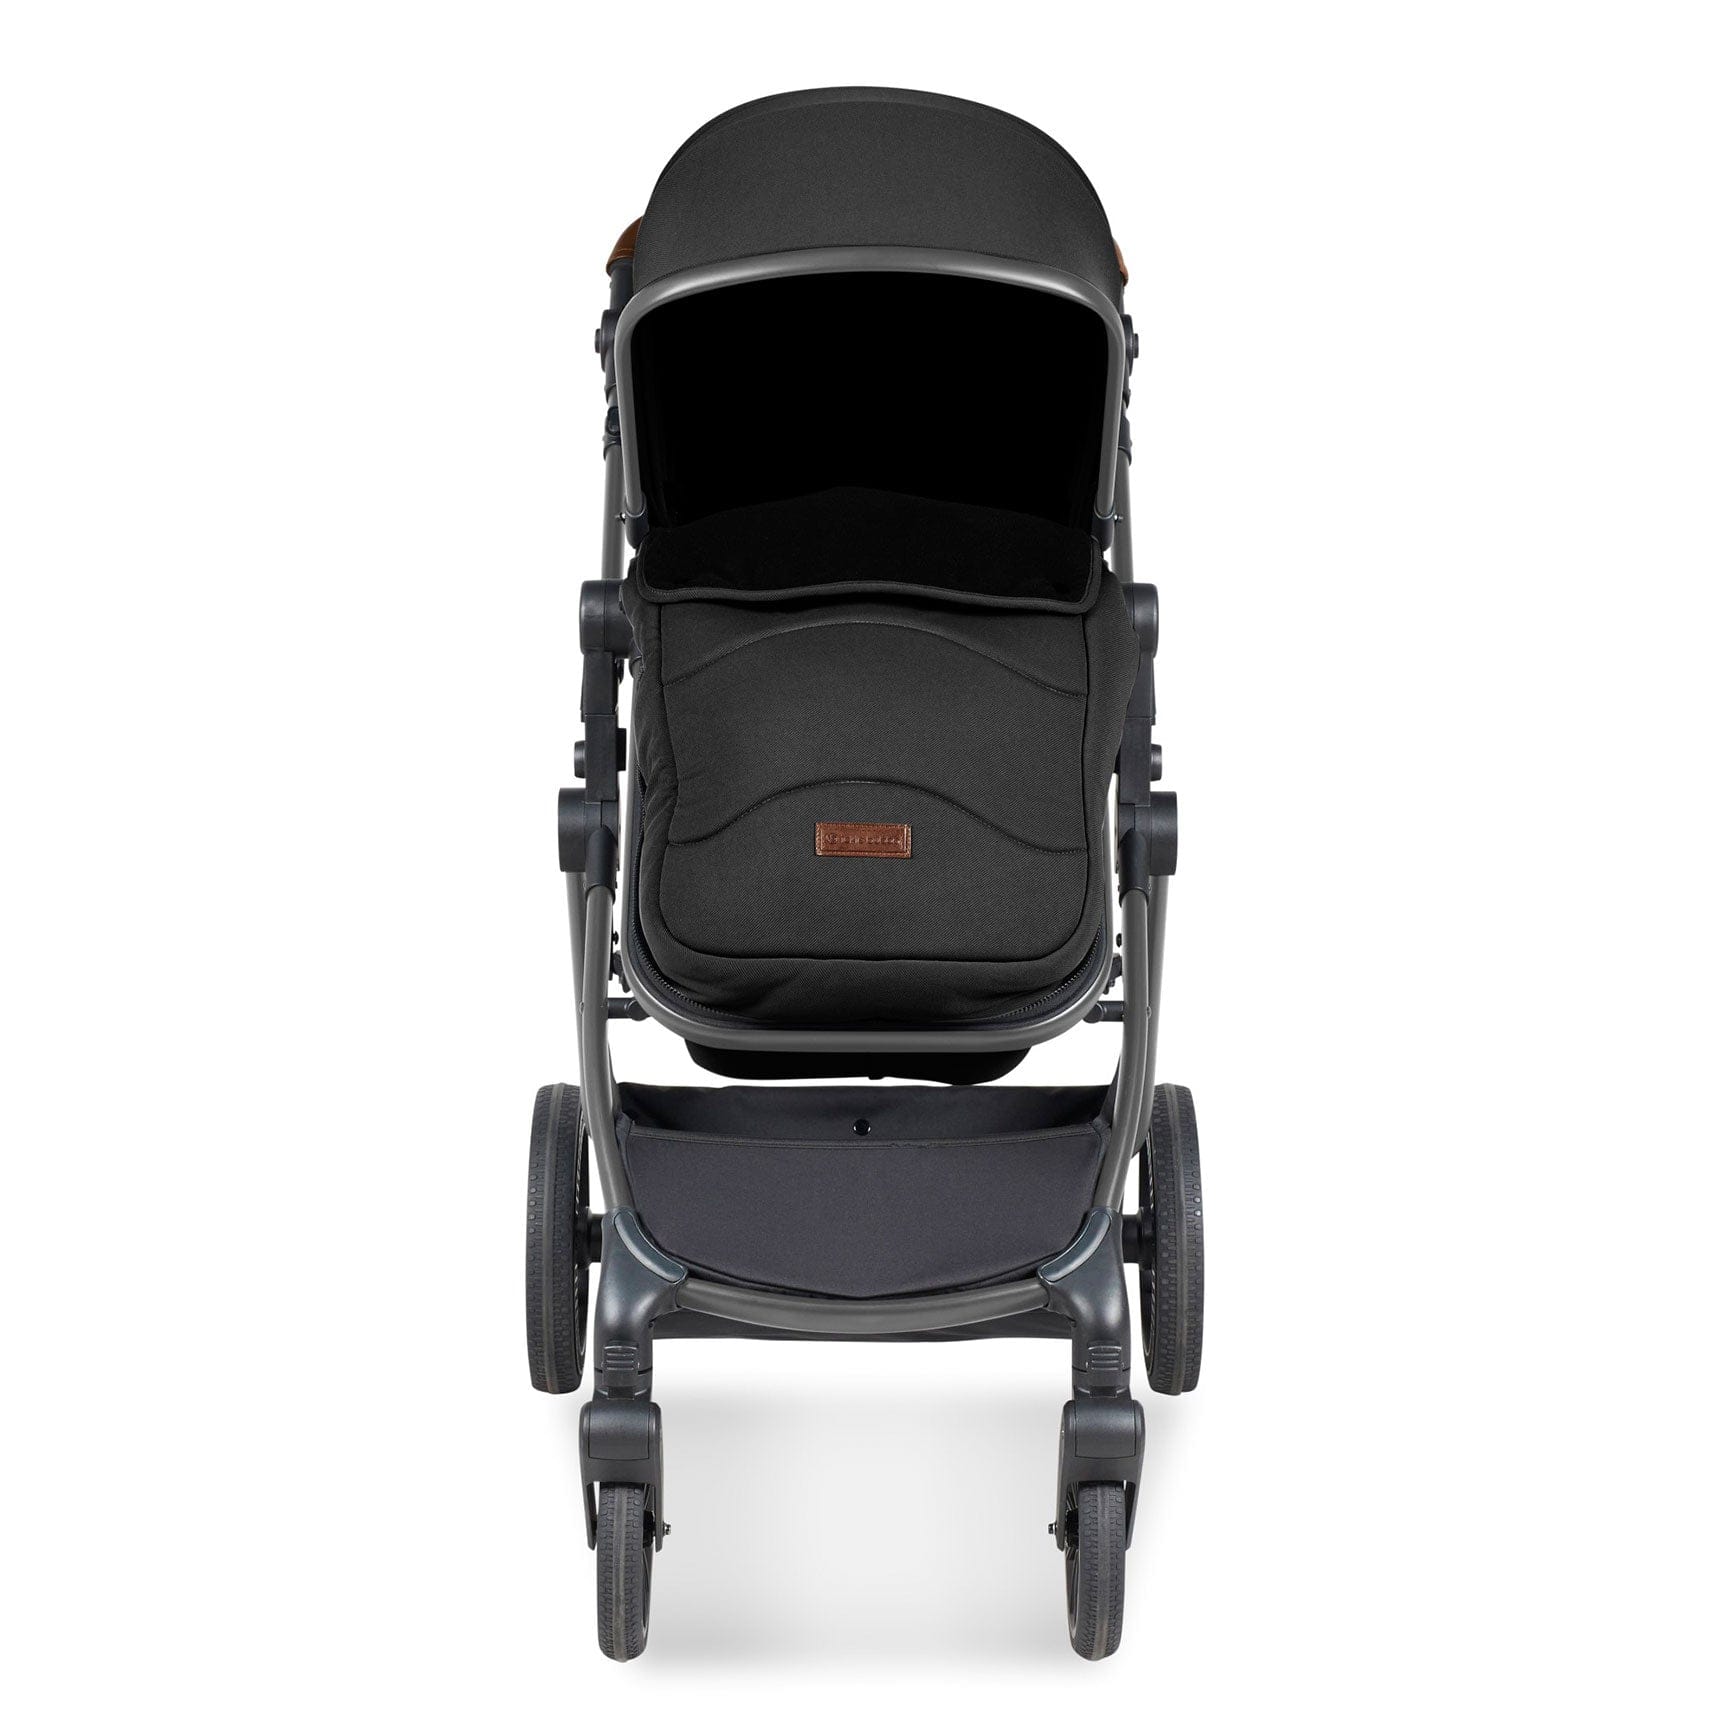 Ickle Bubba Ickle Bubba Cosmo 2 in 1 Plus Carrycot & Pushchair in Gunmetal/Black Travel Systems